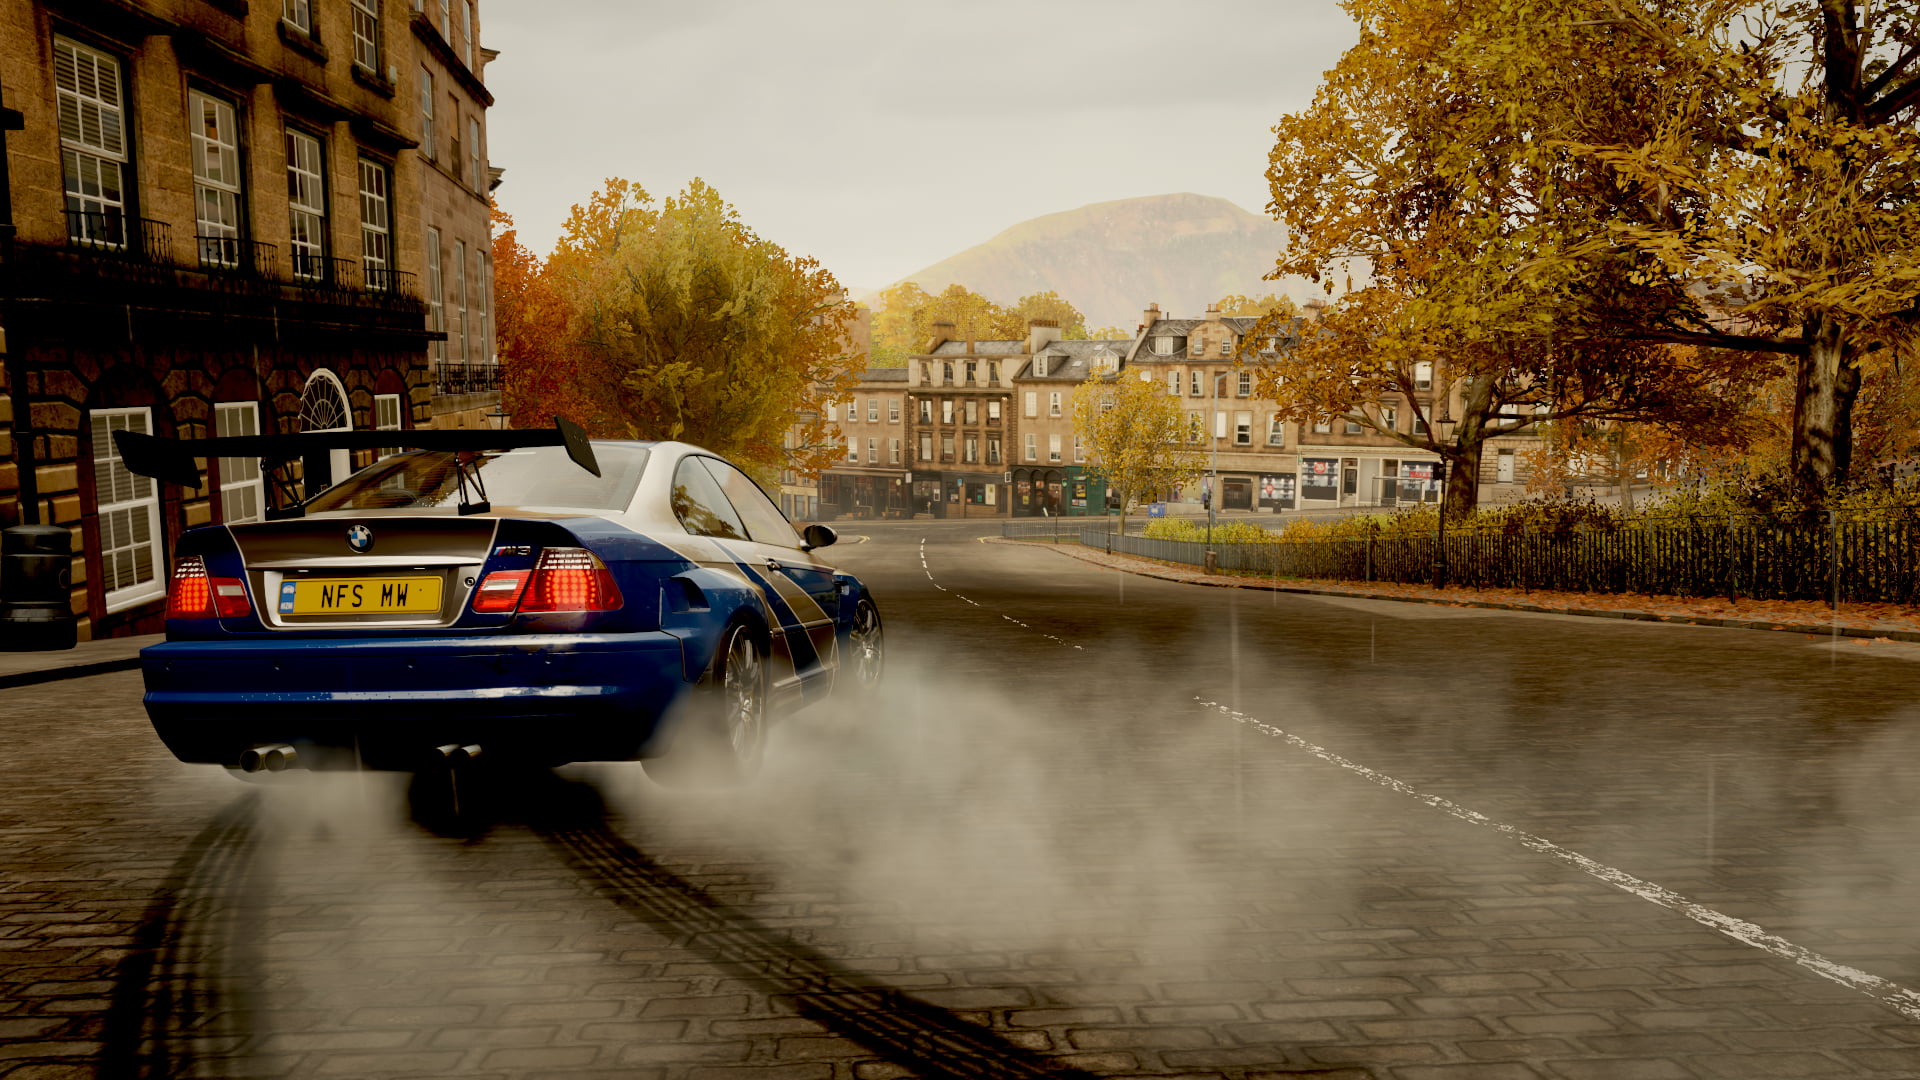 BMW, BMW M3 E46, E-46, Forza Horizon 4, Need for Speed, Need for Speed: Most Wanted